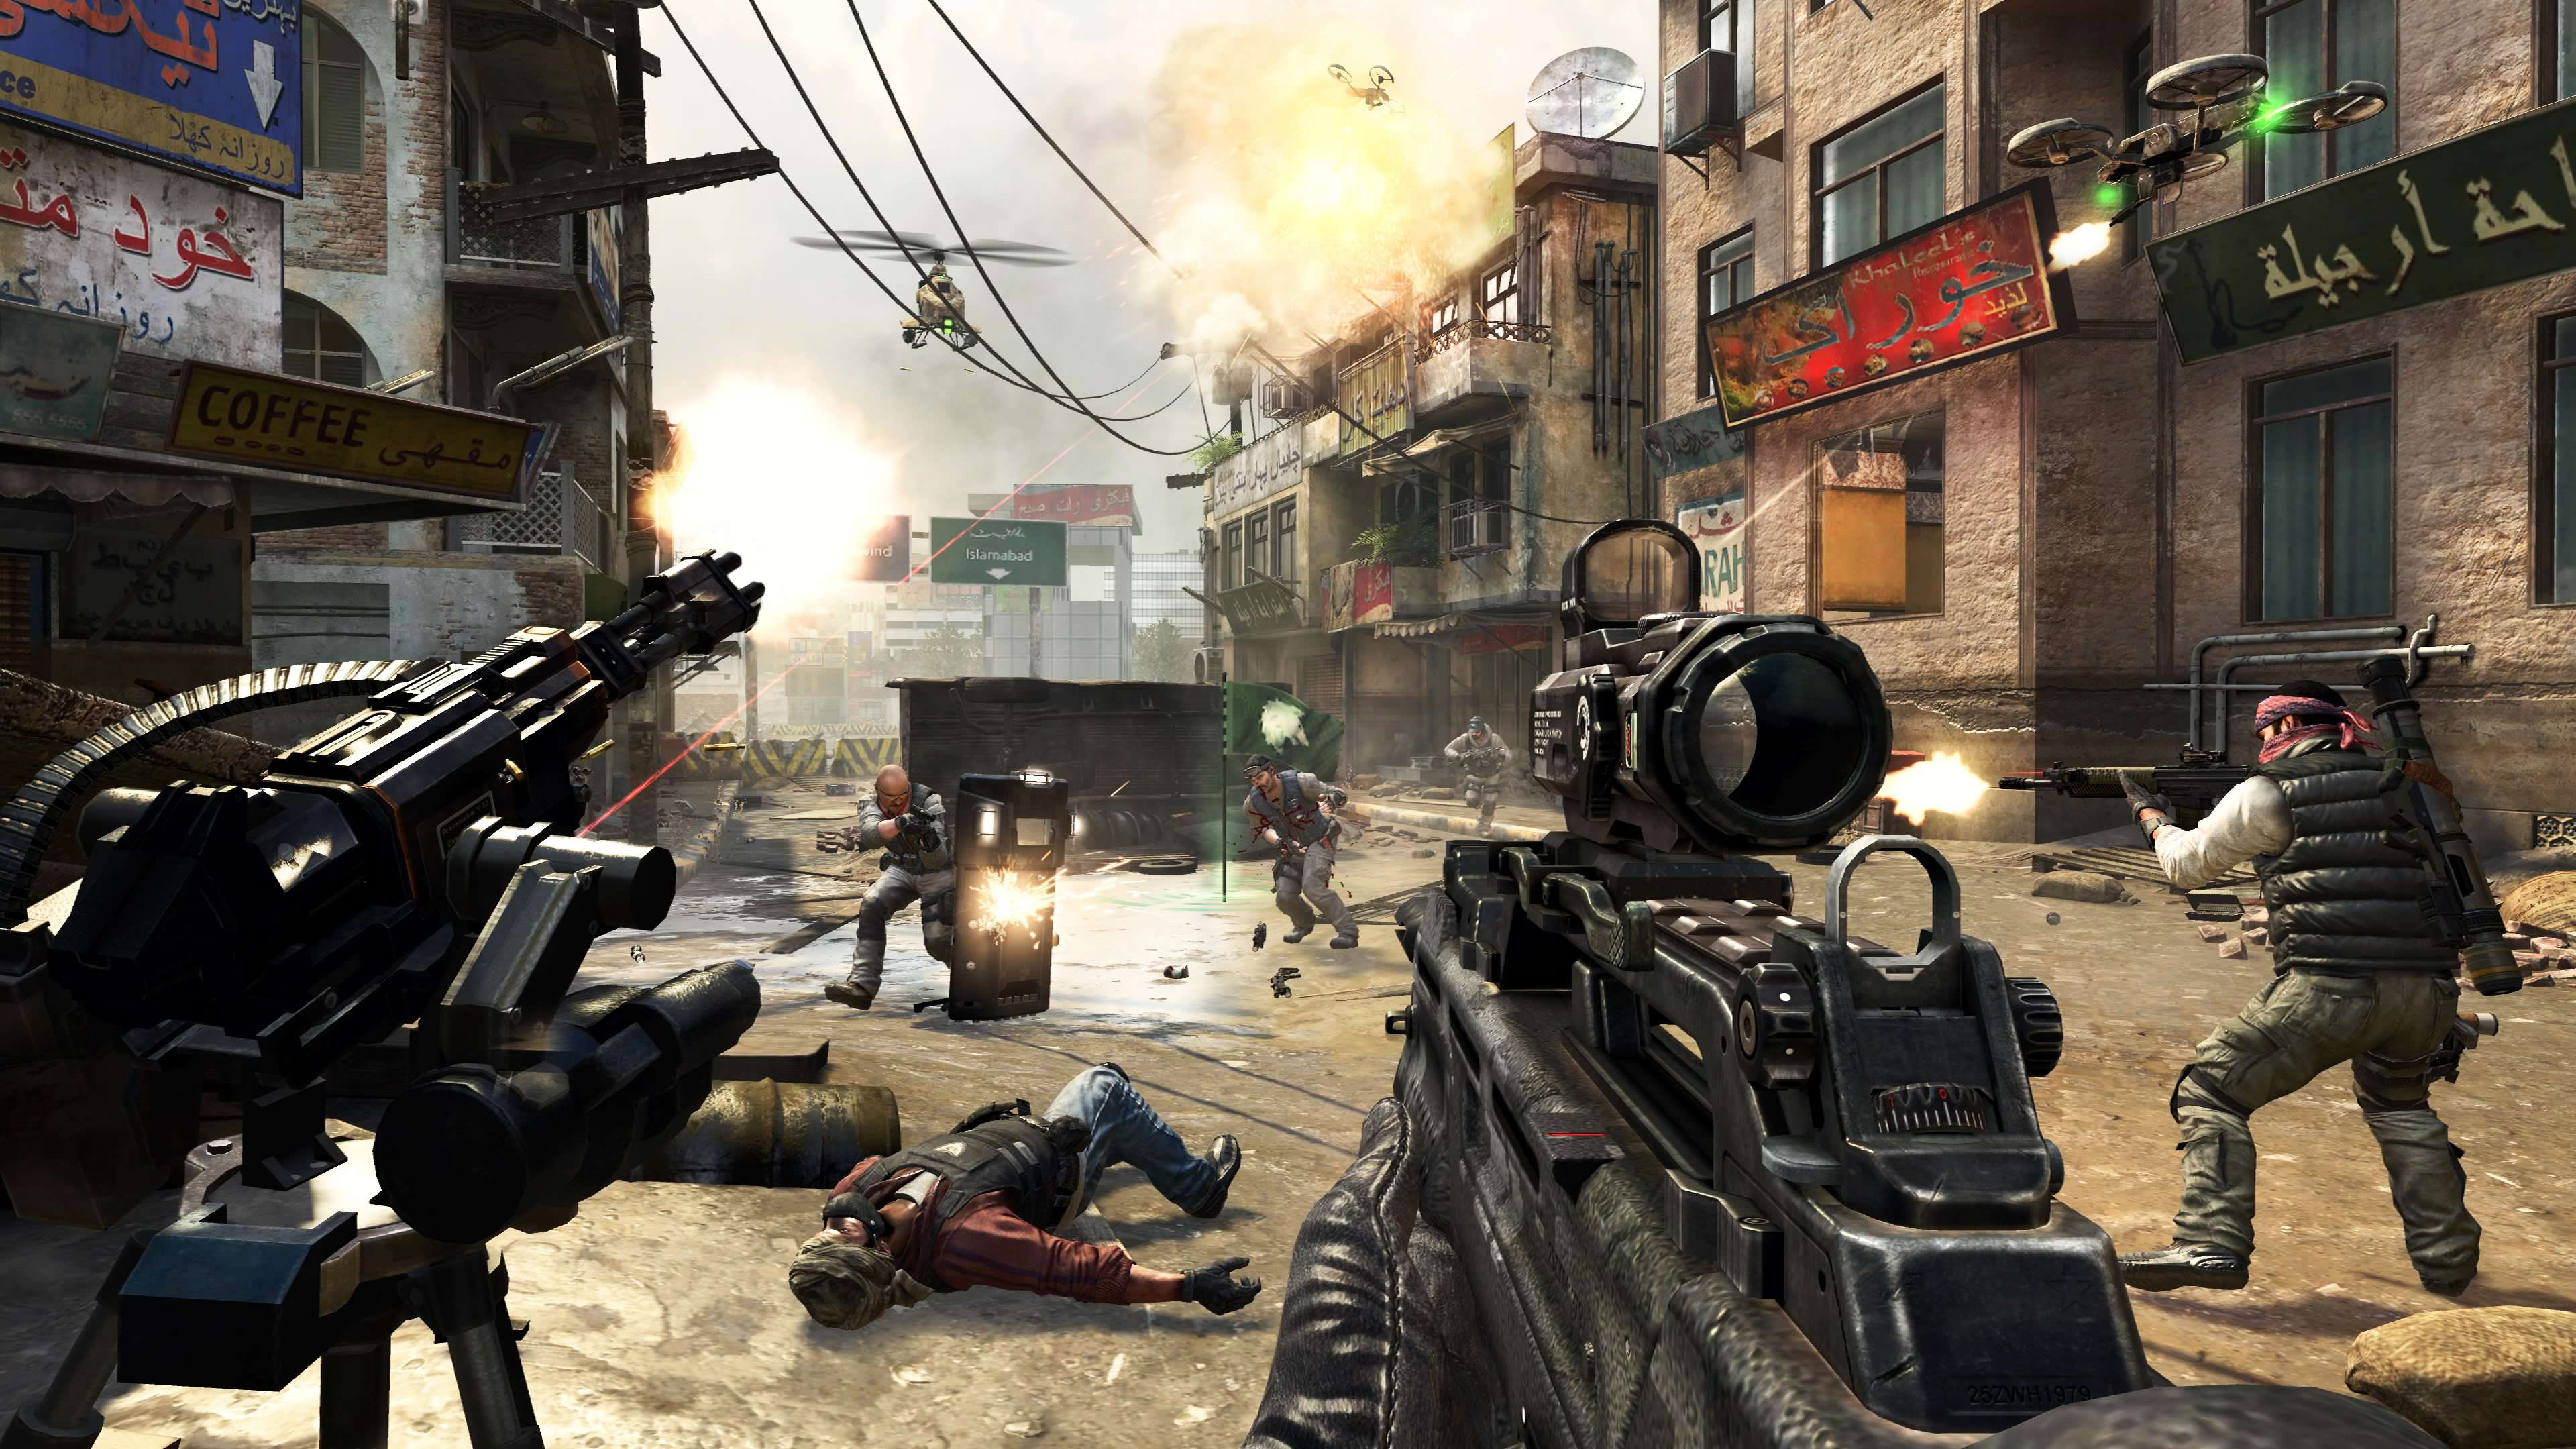 Call of duty black ops 2 pc download free full game